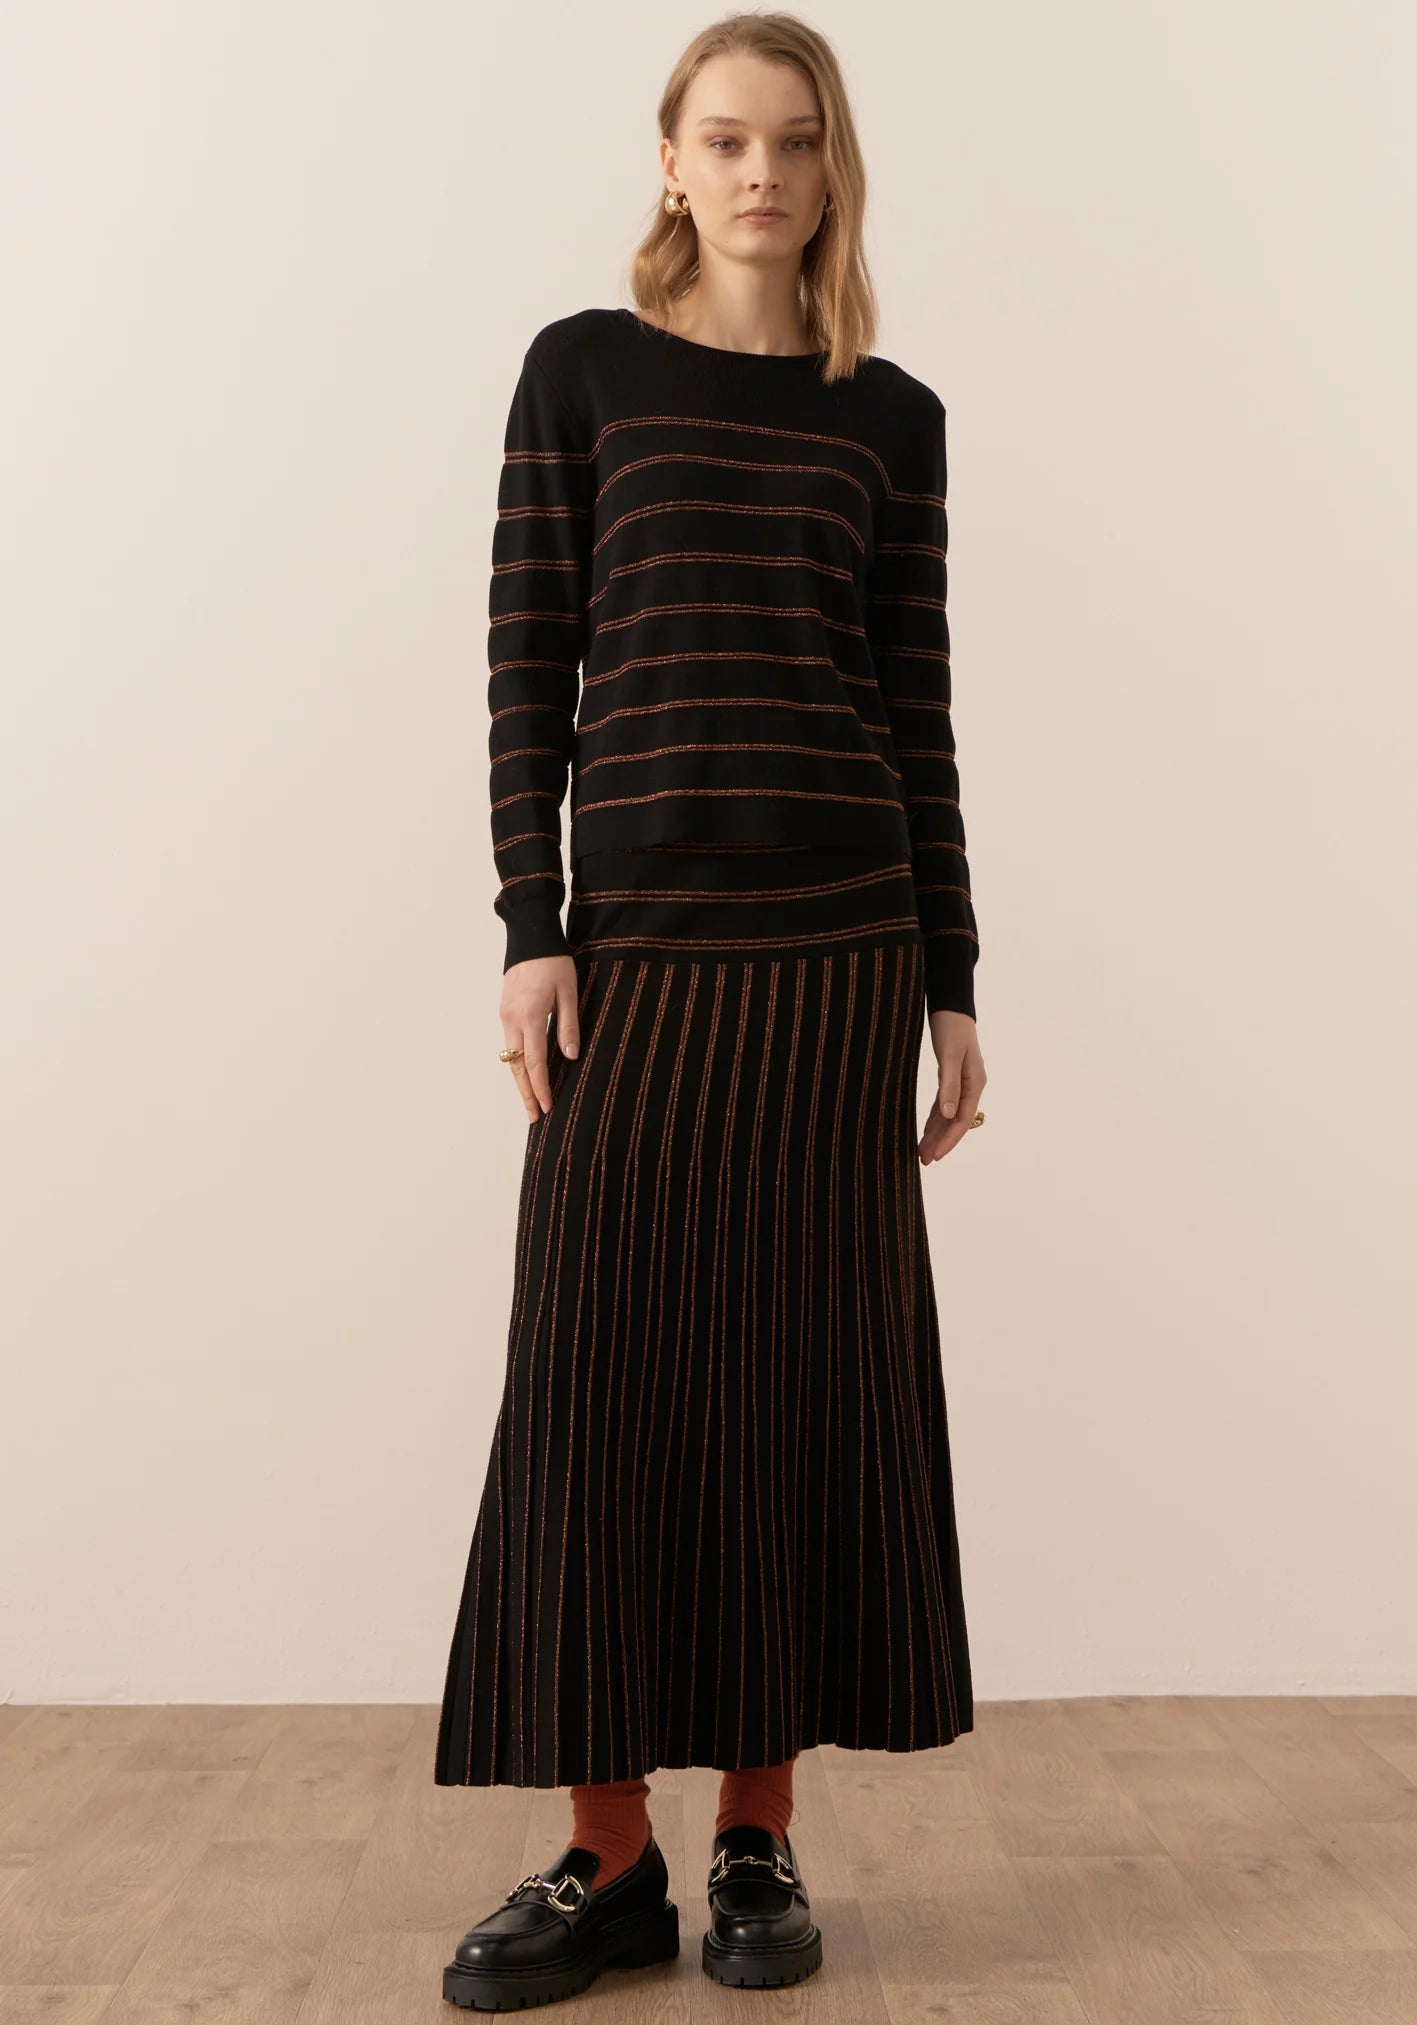 POL Gizelle Lurex Striped Knit in Black and Copper